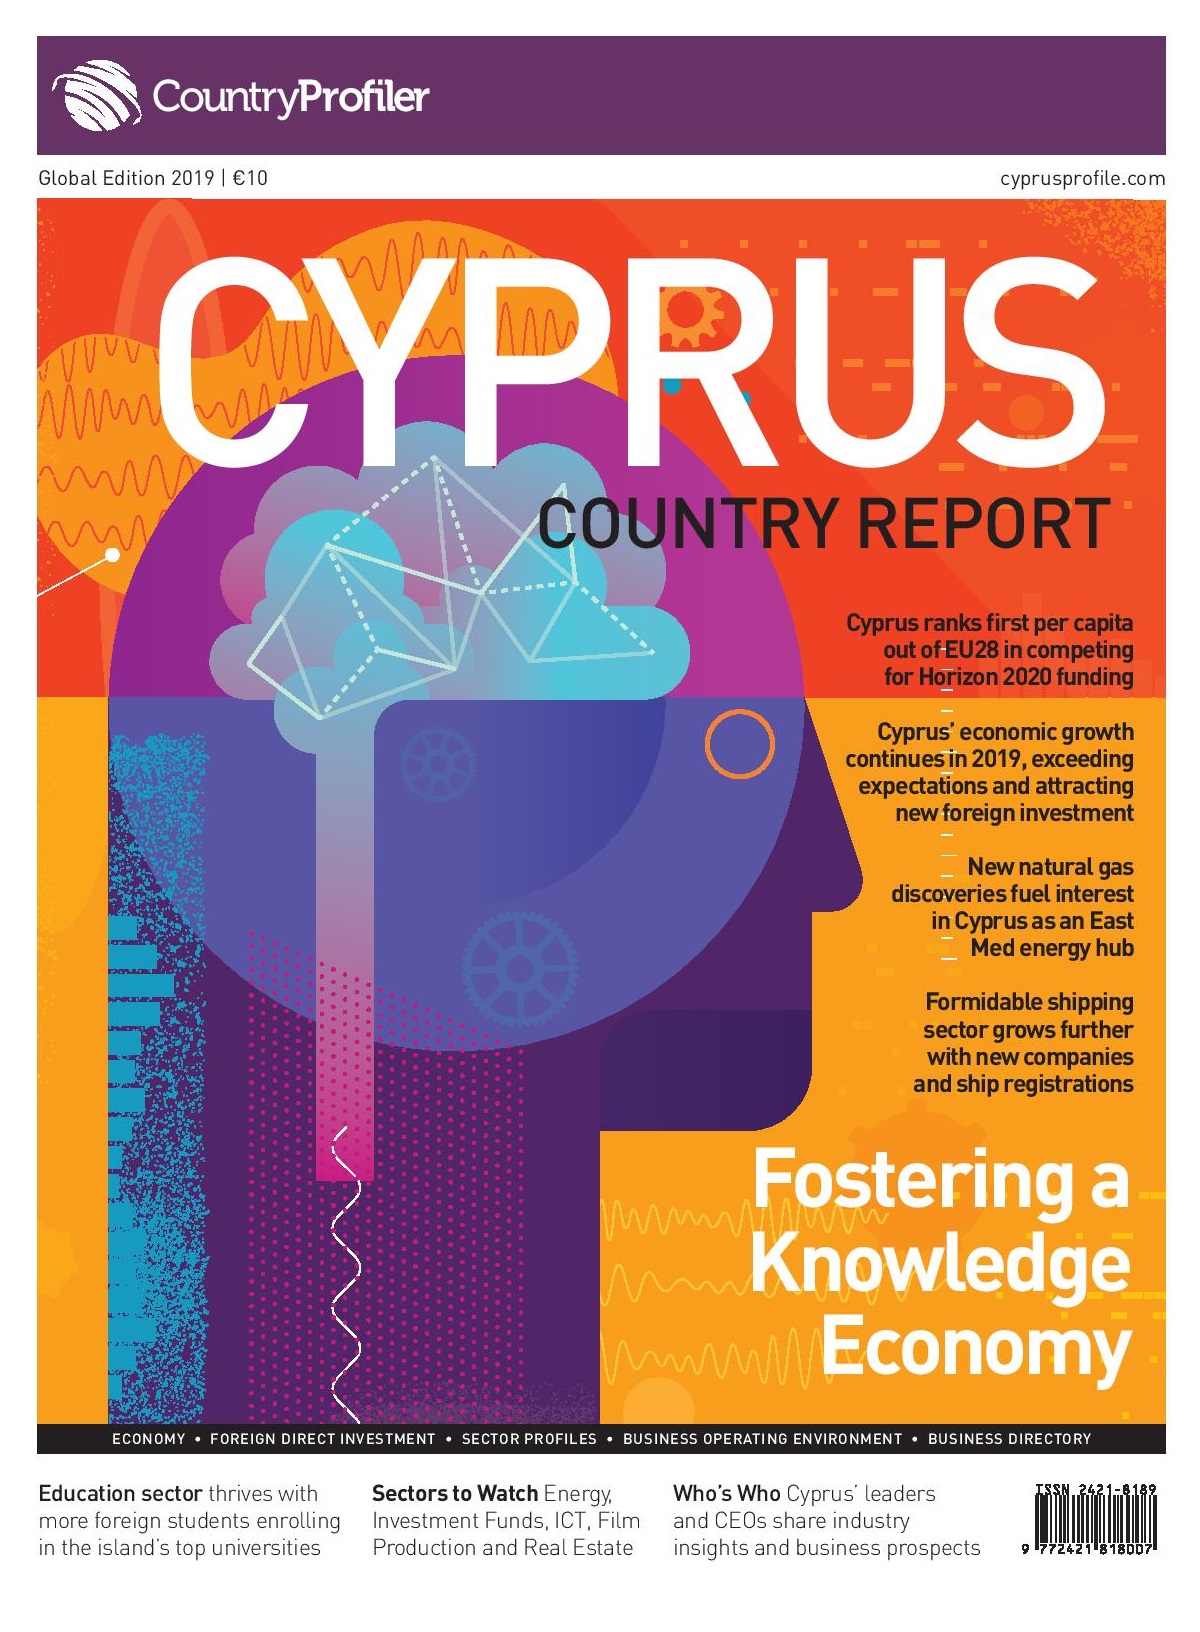 2019 Cyprus Country Report